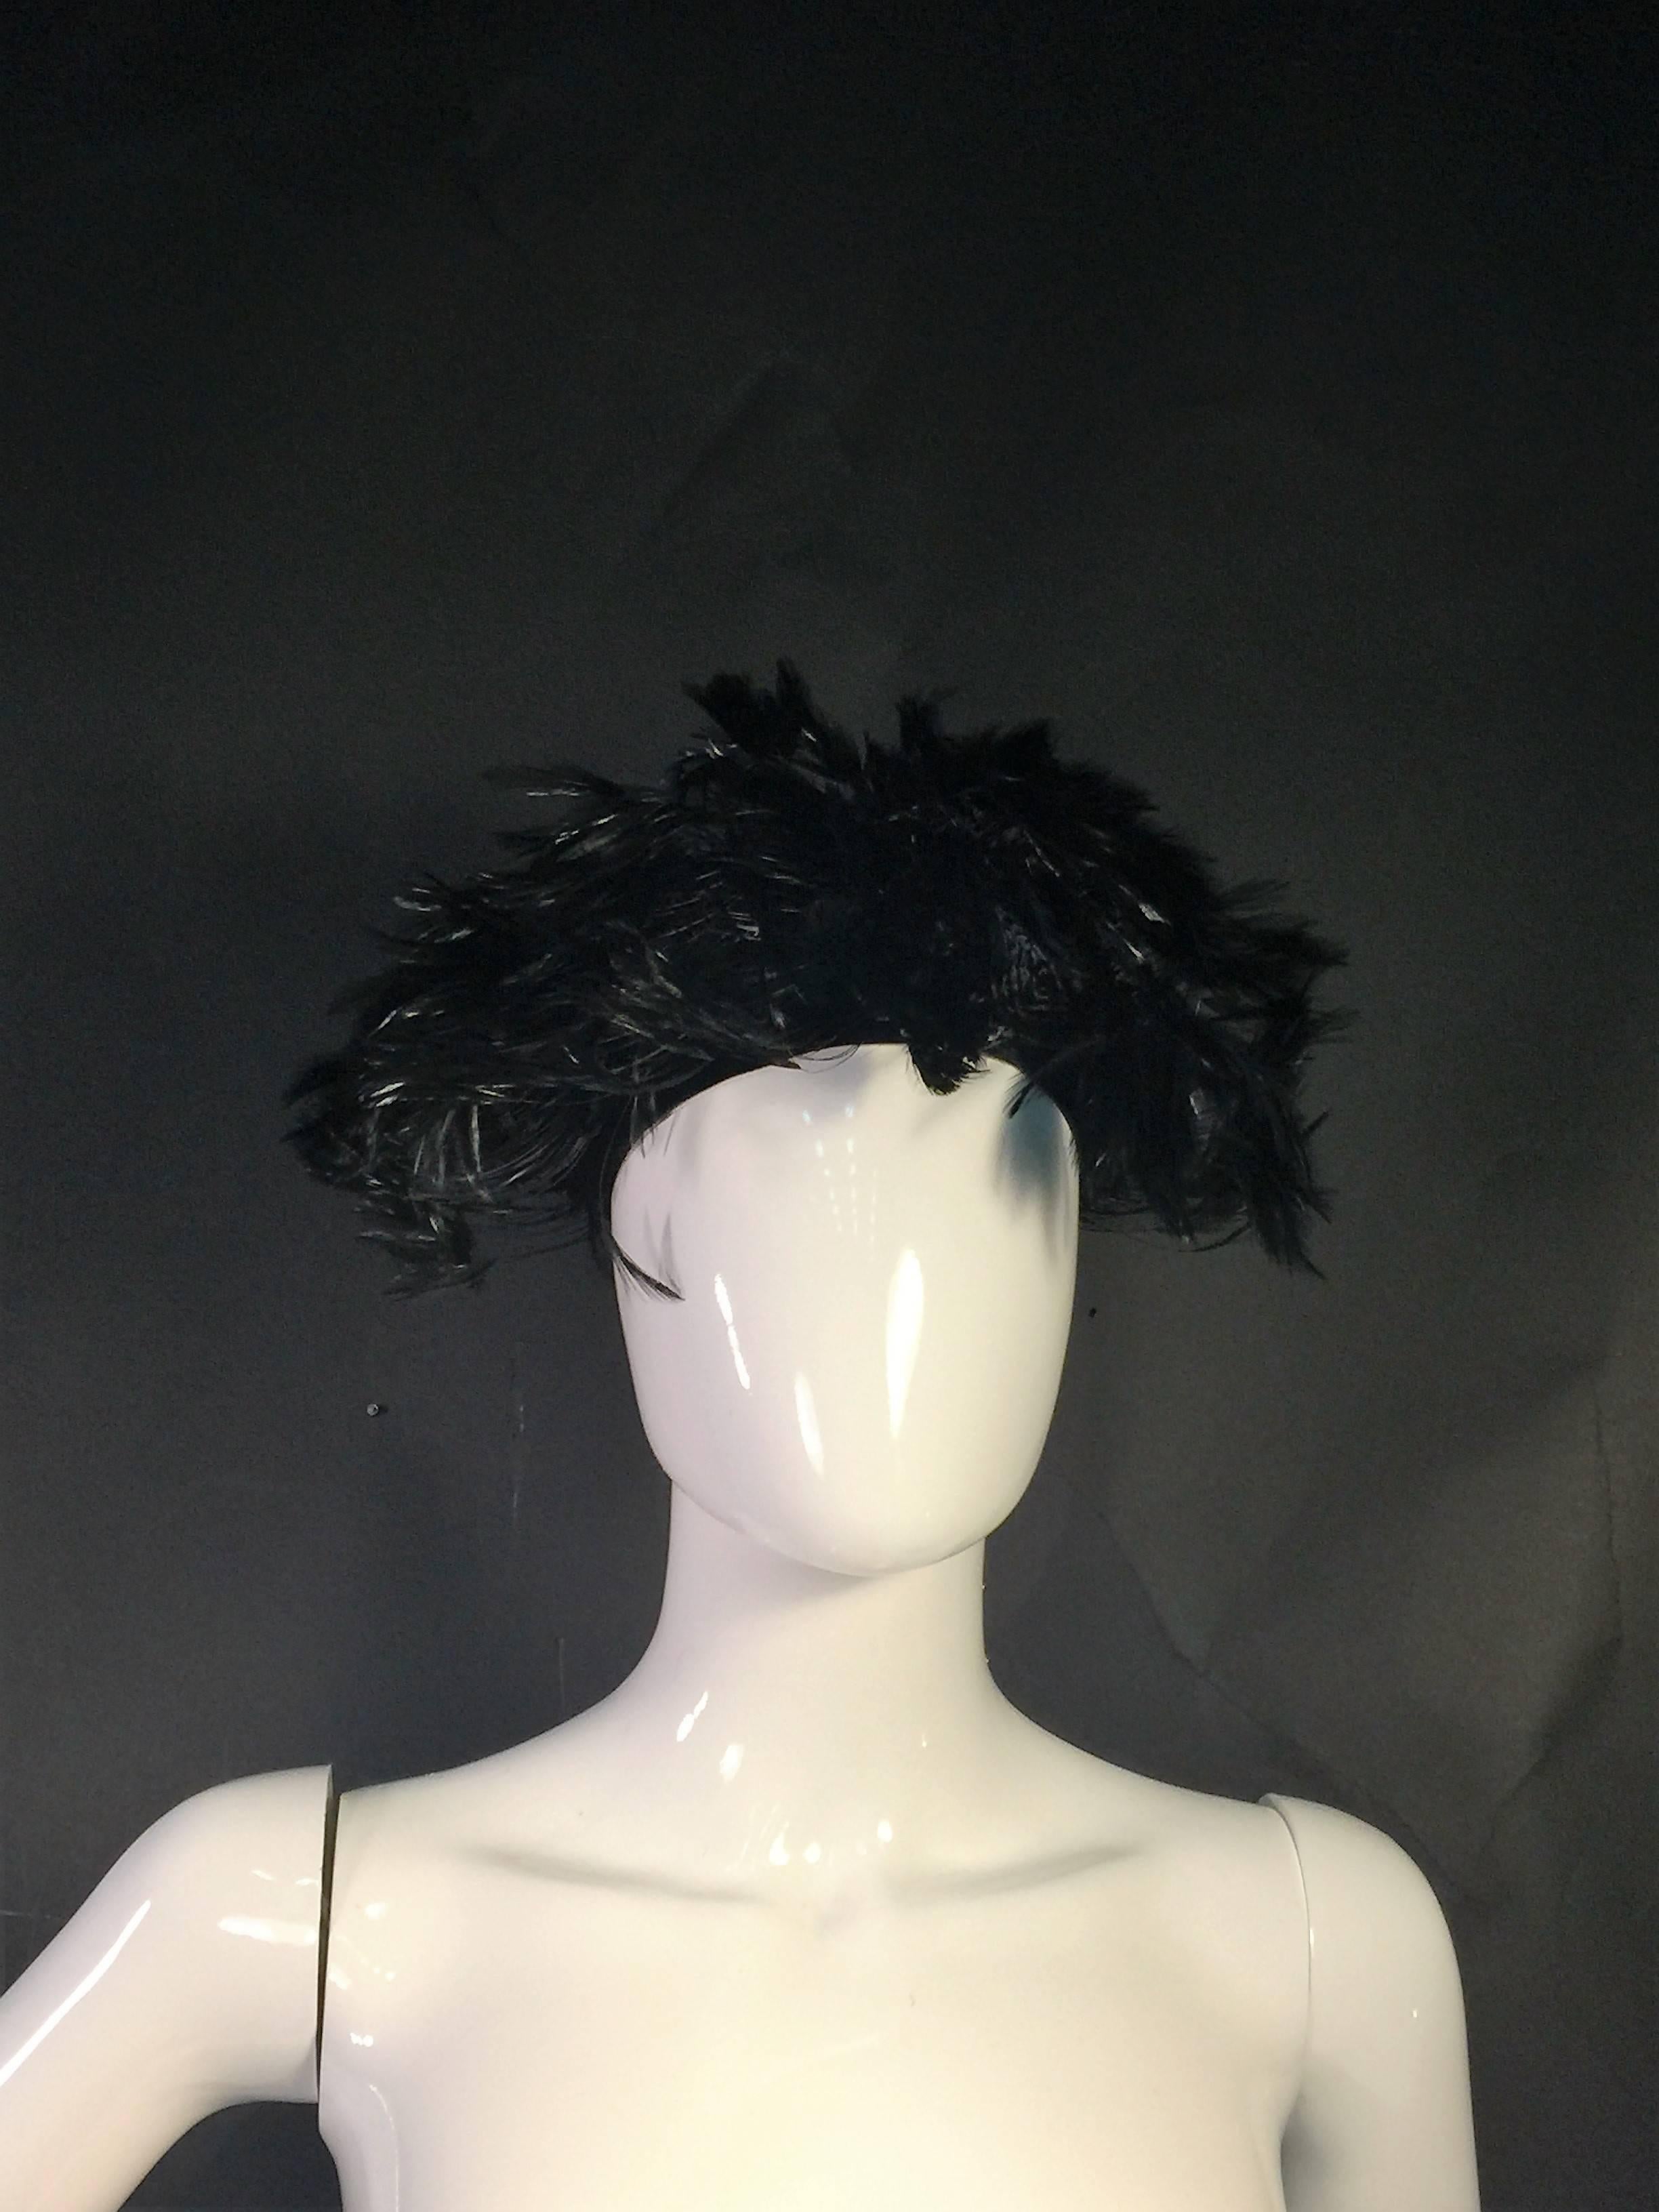 Sexy Black Velvet Applique on Stiff Net Form Hat with Exotic Black Feathers Designed by Christian Dior.